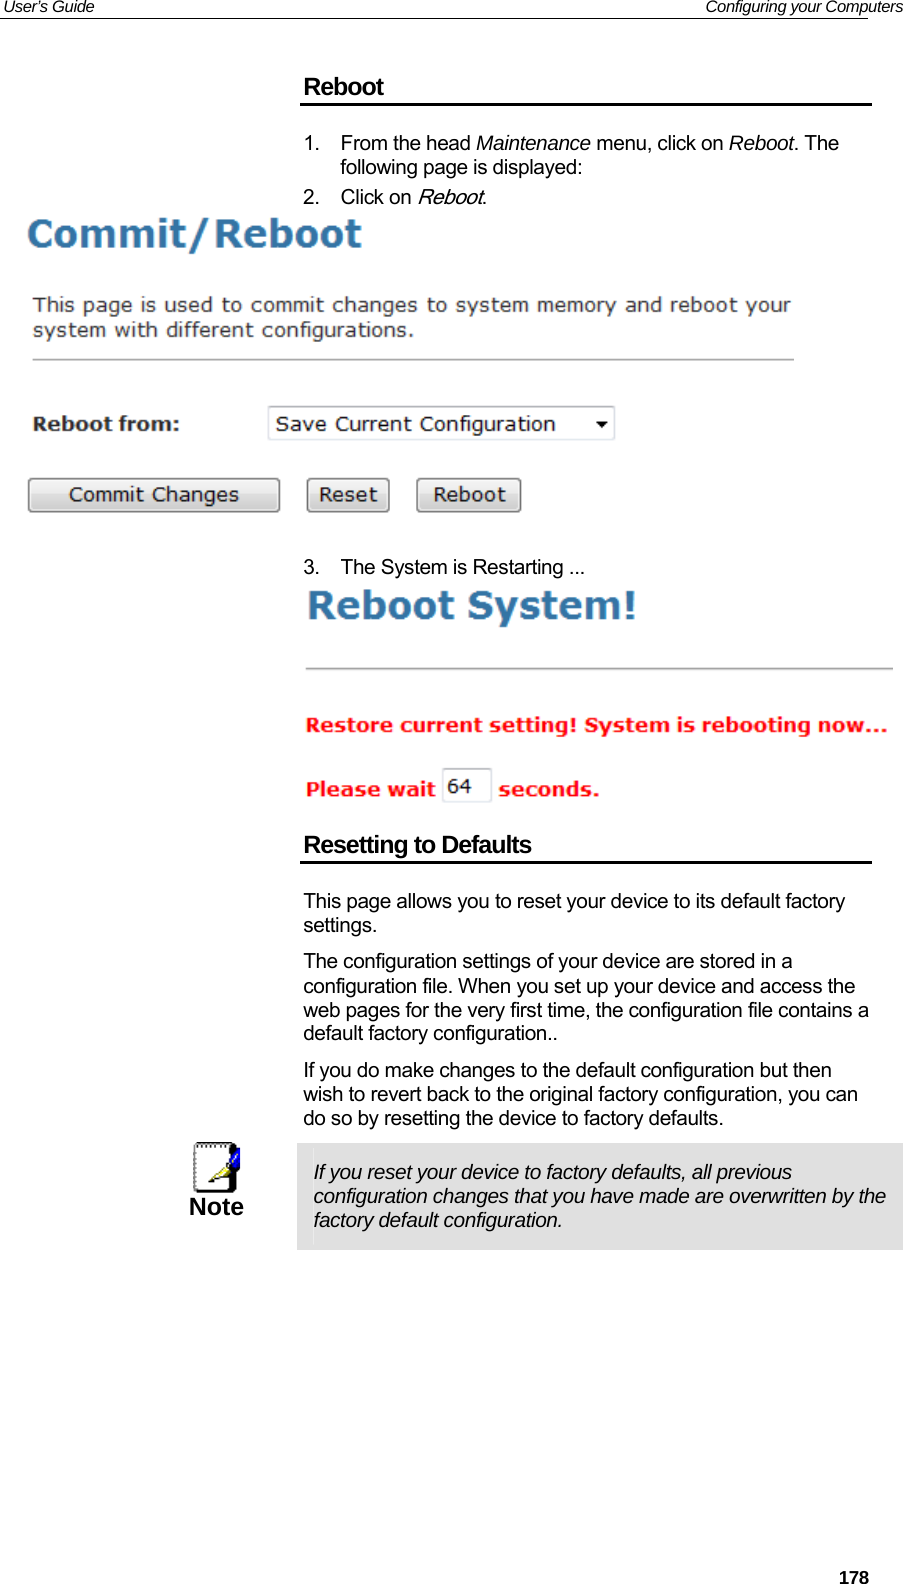 User’s Guide   Configuring your Computers Reboot 1. From the head Maintenance menu, click on Reboot. The following page is displayed: 2. Click on Reboot.   3.  The System is Restarting ...  Resetting to Defaults This page allows you to reset your device to its default factory settings. The configuration settings of your device are stored in a configuration file. When you set up your device and access the web pages for the very first time, the configuration file contains a default factory configuration.. If you do make changes to the default configuration but then wish to revert back to the original factory configuration, you can do so by resetting the device to factory defaults.  Note  If you reset your device to factory defaults, all previous configuration changes that you have made are overwritten by the factory default configuration.           178